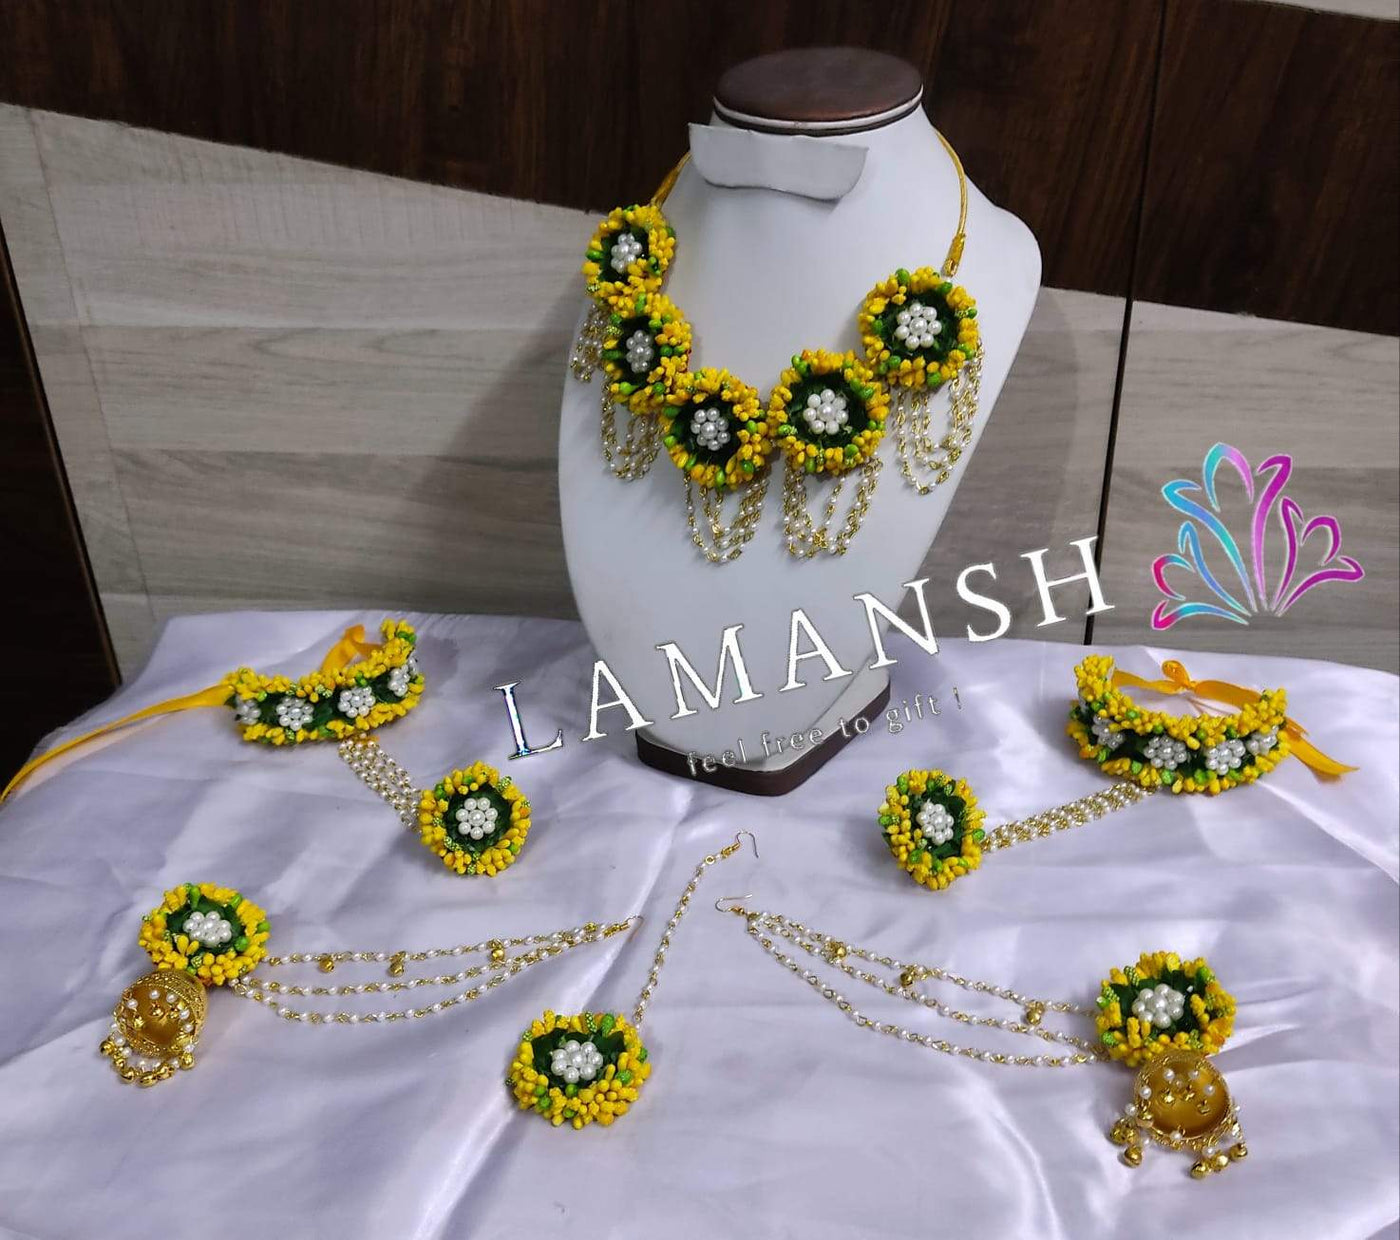 Lamansh Flower Jewellery 1 Necklace, 2 Jhumki Earrings with extended clips , 1 Maangtika & 2 Bracelets attached to ring set / Yellow-Green LAMANSH® Special Floral 🌺 Jewellery Set for Haldi / Artificial Flower set